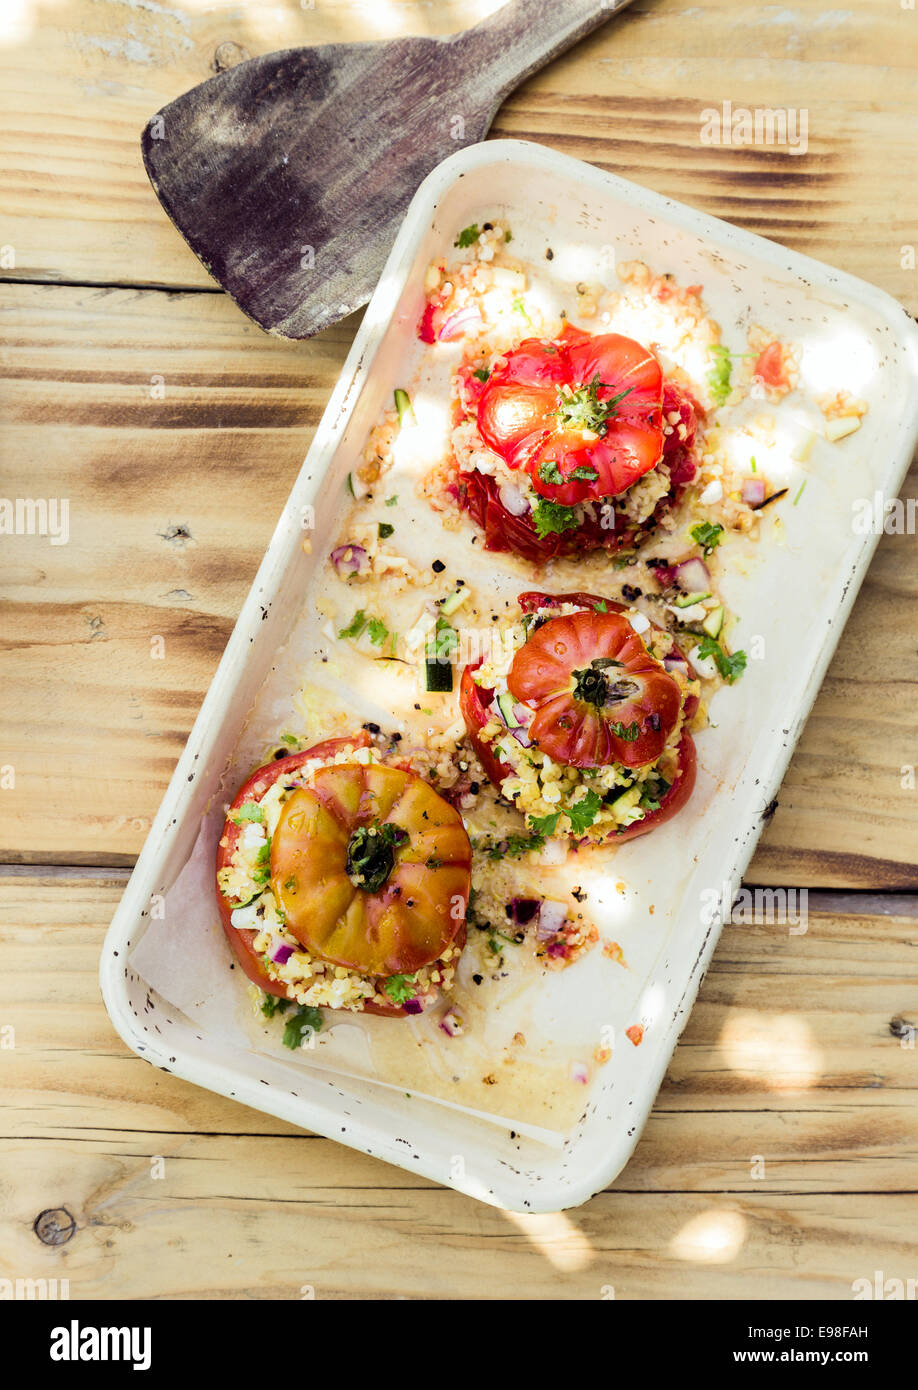 Overhead view of a plate of three ripe red baked tomatoes stuffed to overflowing with herbal grains for a healthy nutritious vegetarian meal Stock Photo